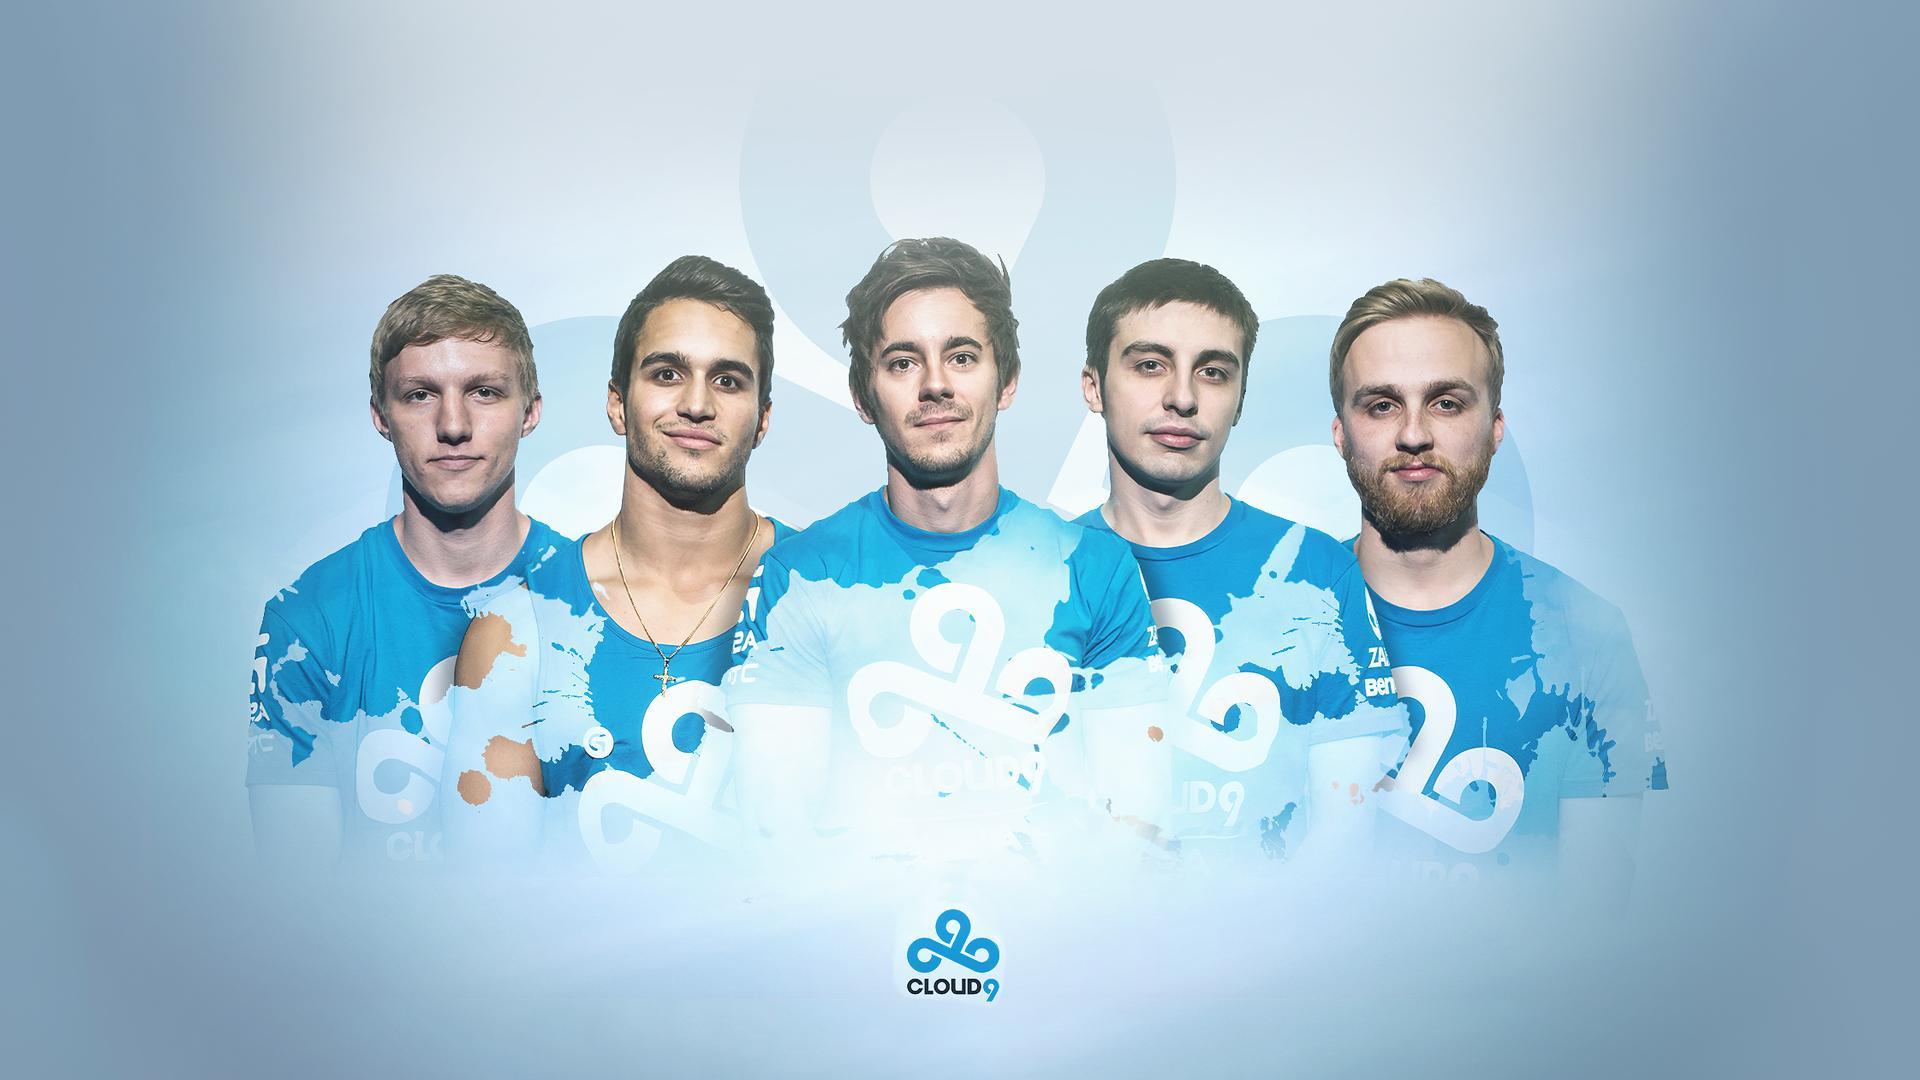 Is there a C9 wallpaper that has the players on it?